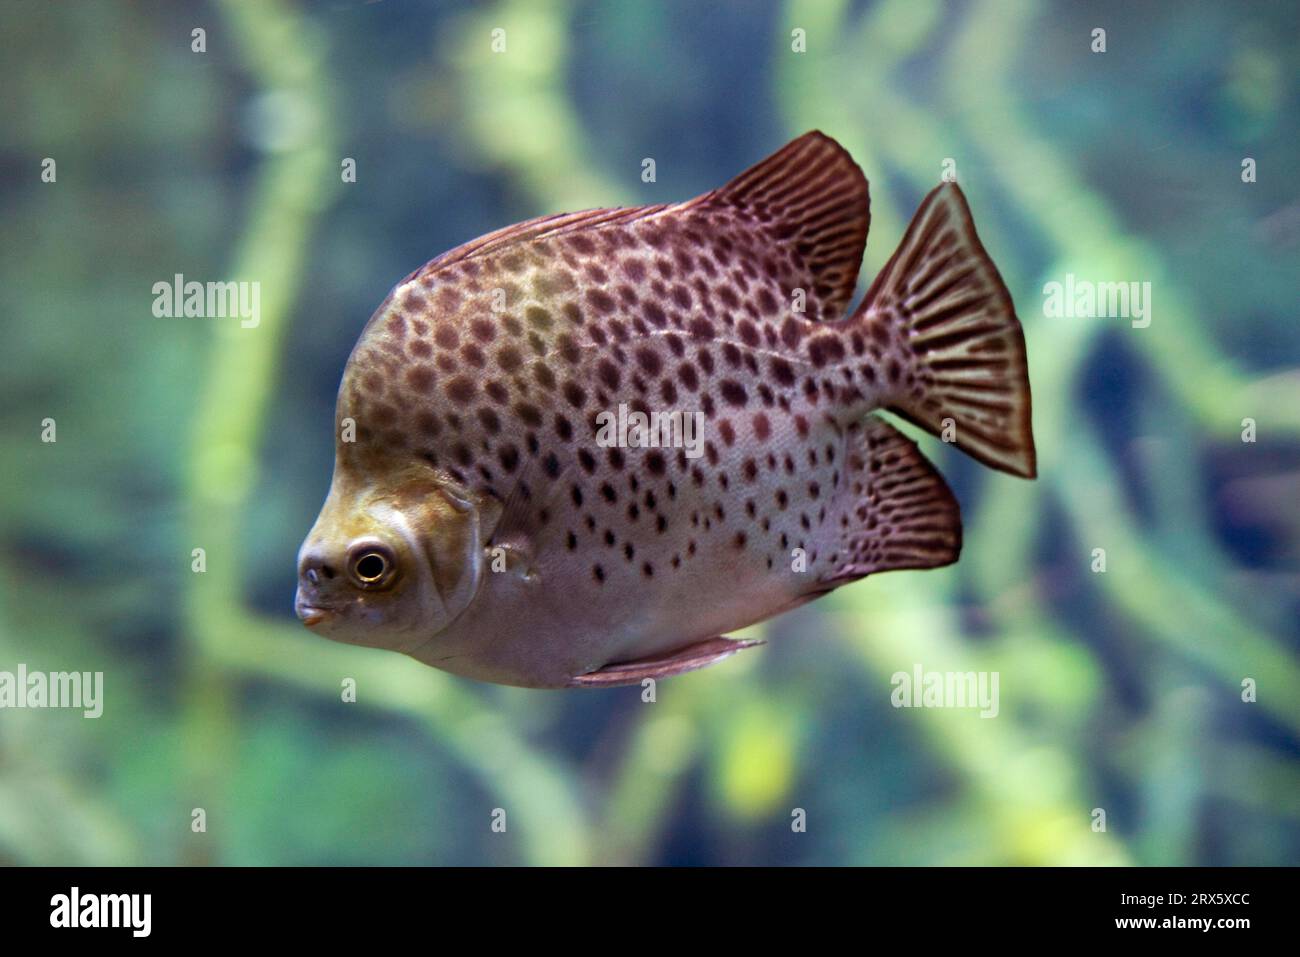 Red argus fish (Scatophagus argus atromaculatus), red-fronted argus, red argus, lateral, detachable Stock Photo